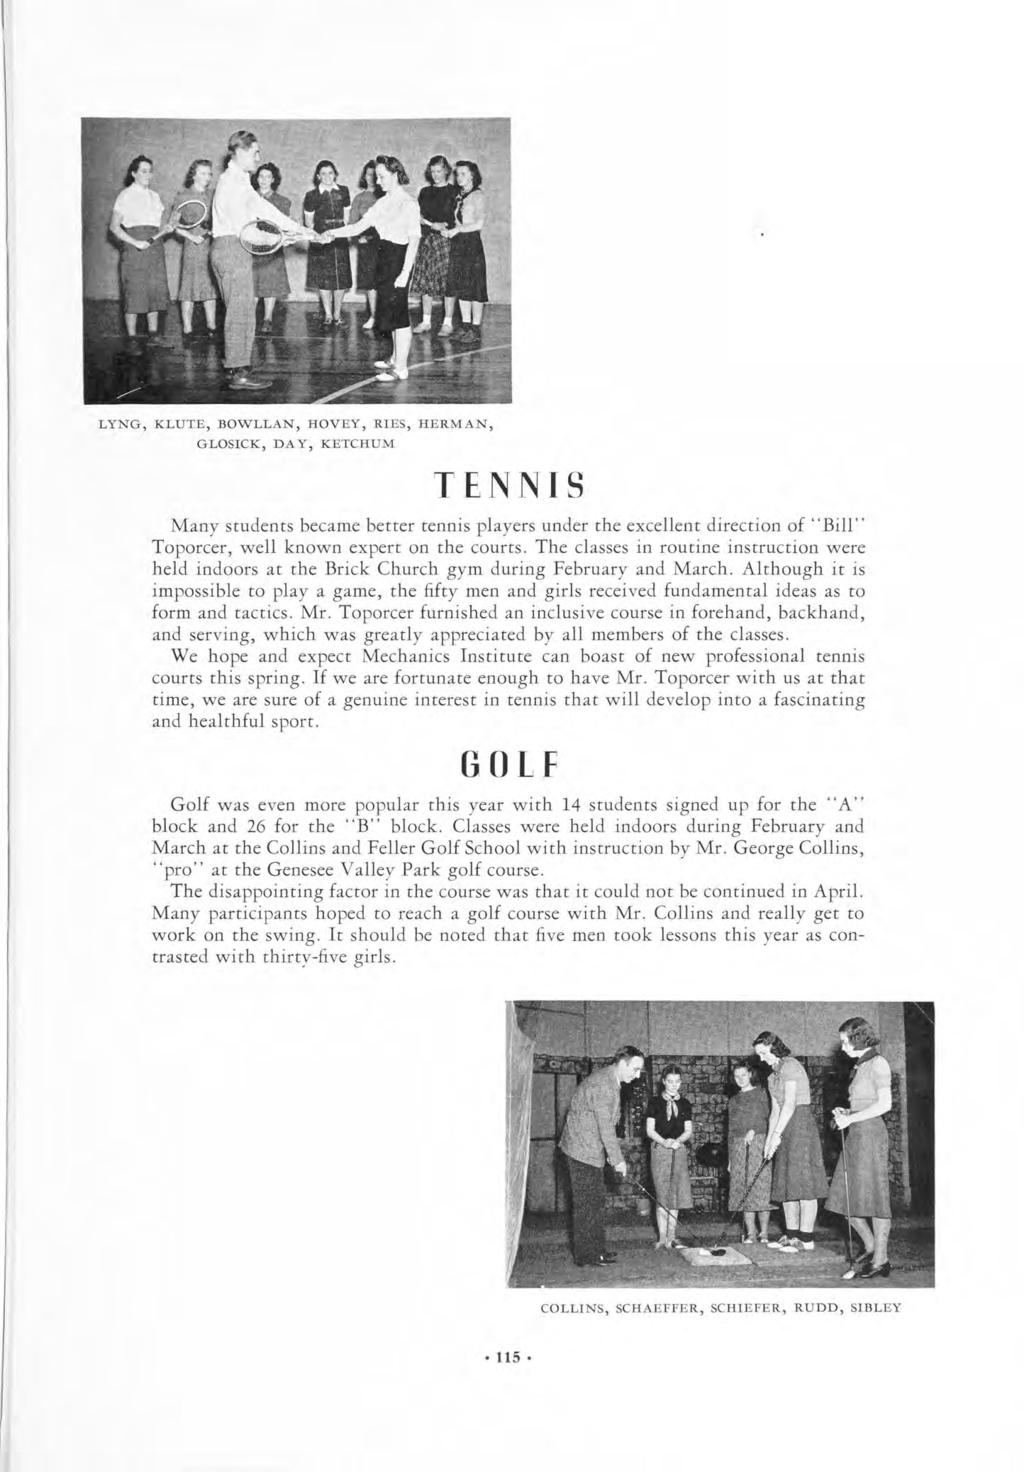 LYNG, KLUTE, BOWLLAN, HOVEY, RIES, HERMAN, GLOSICK, DA Y, KETCHUM TENNIS Many students became better tennis players under the excellent direction of "Bill" Toporcer, well known on expert the courts.